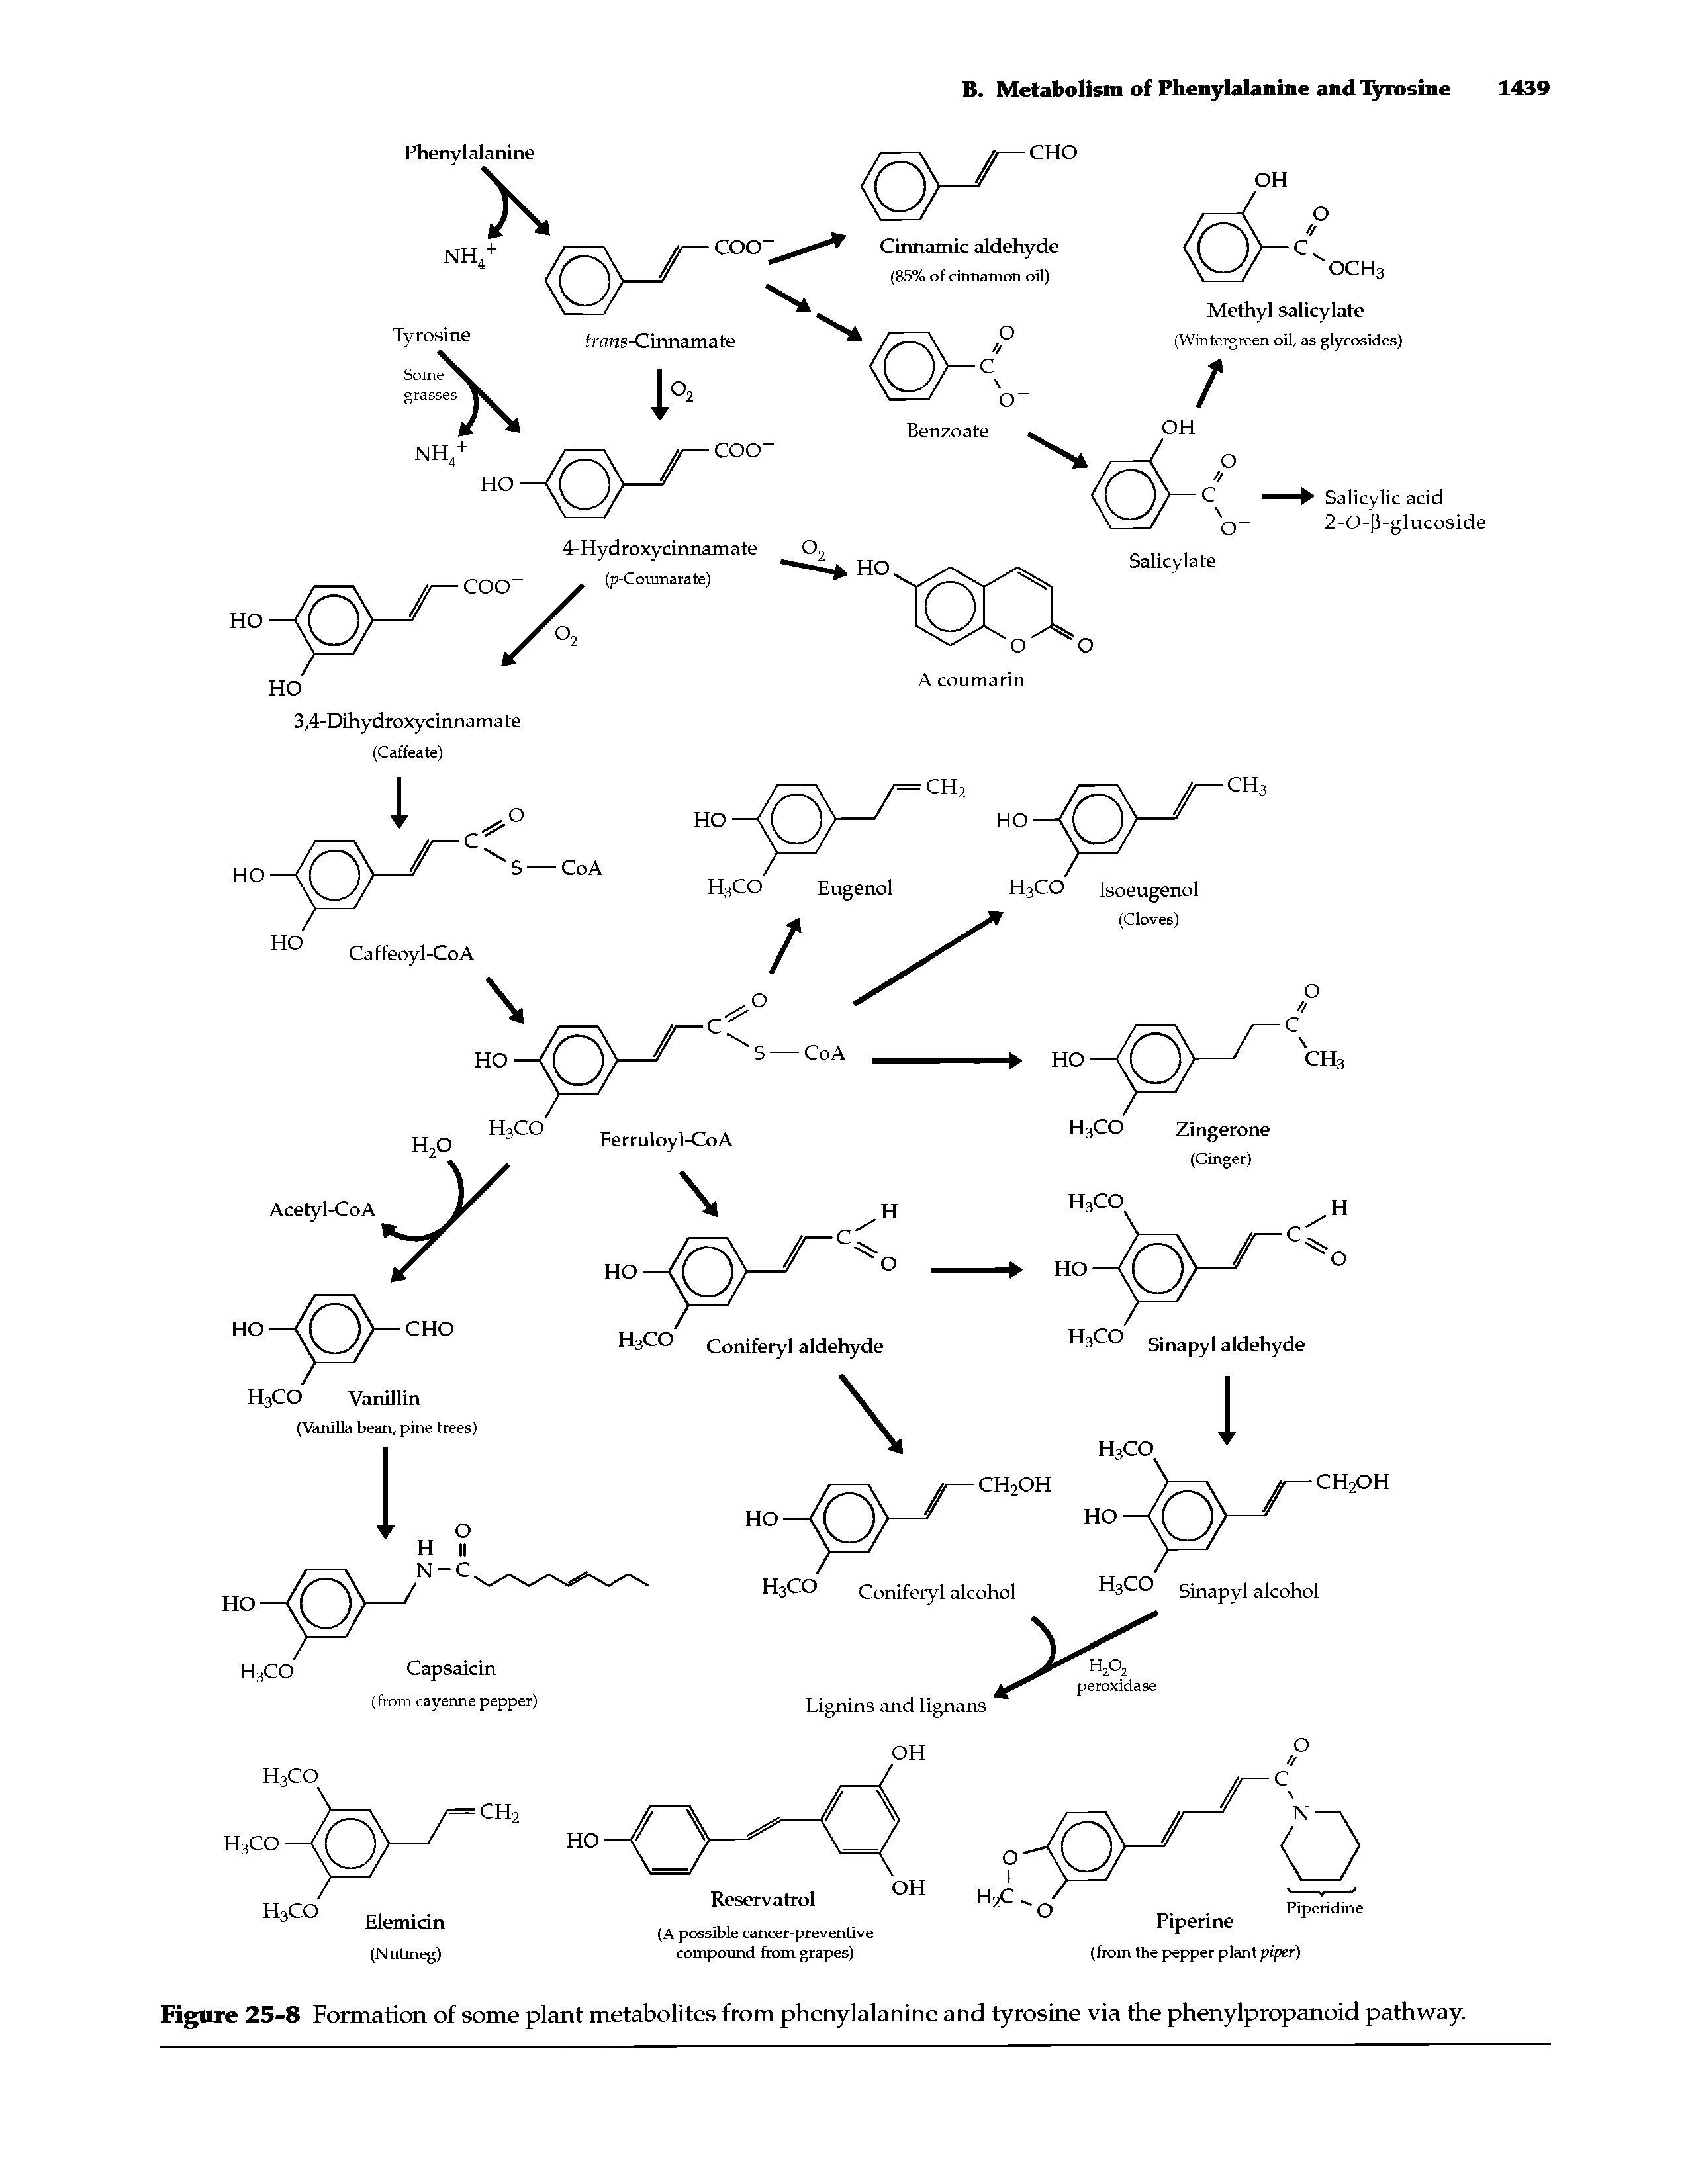 Figure 25-8 Formation of some plant metabolites from phenylalanine and tyrosine via the phenylpropanoid pathway...